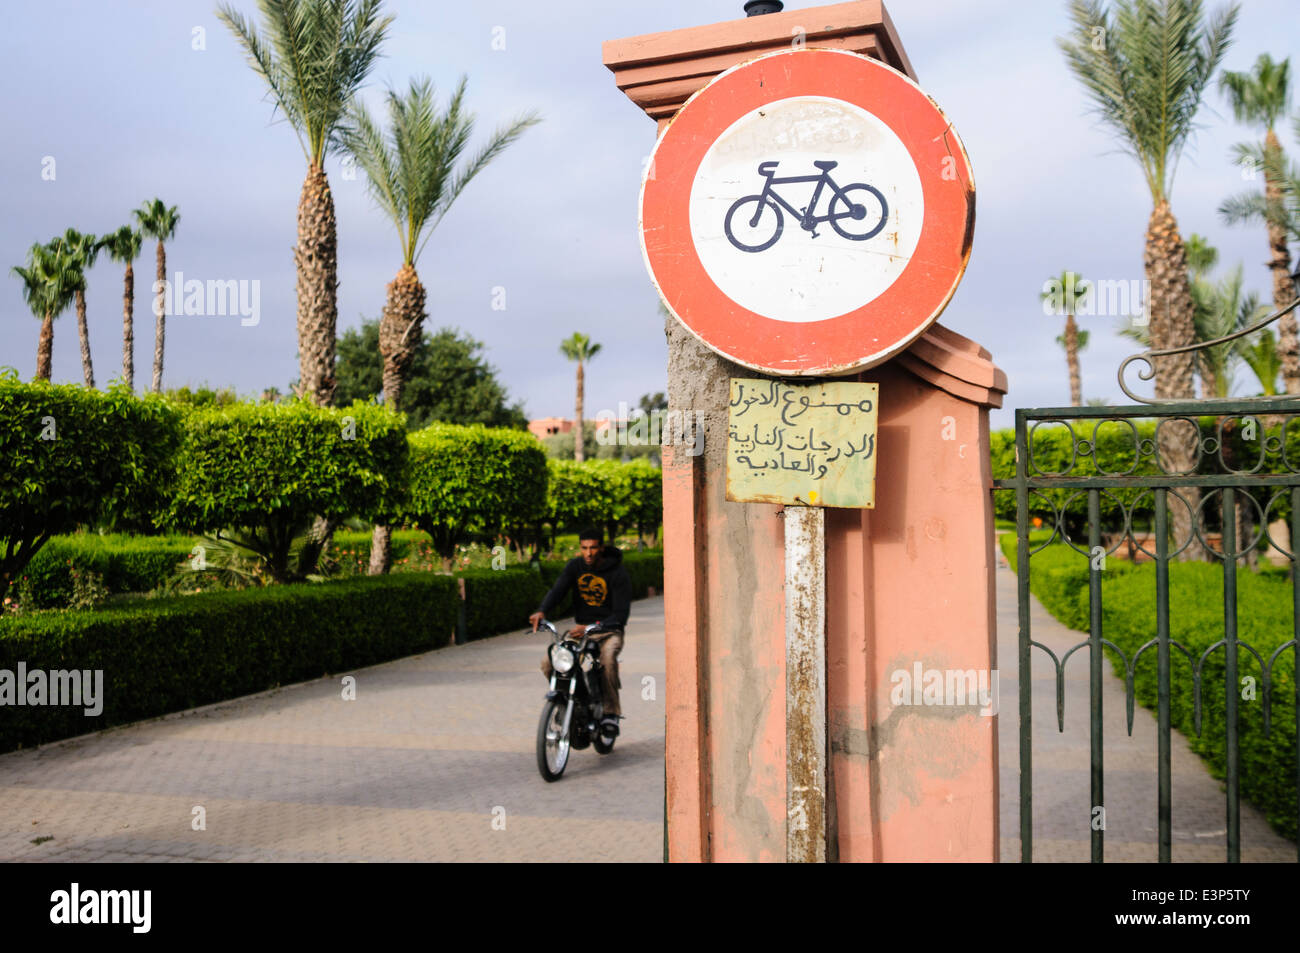 Man rides a scooter along a footpath with a sign saying 'No bicycles' in Marrakech, Morocco Stock Photo